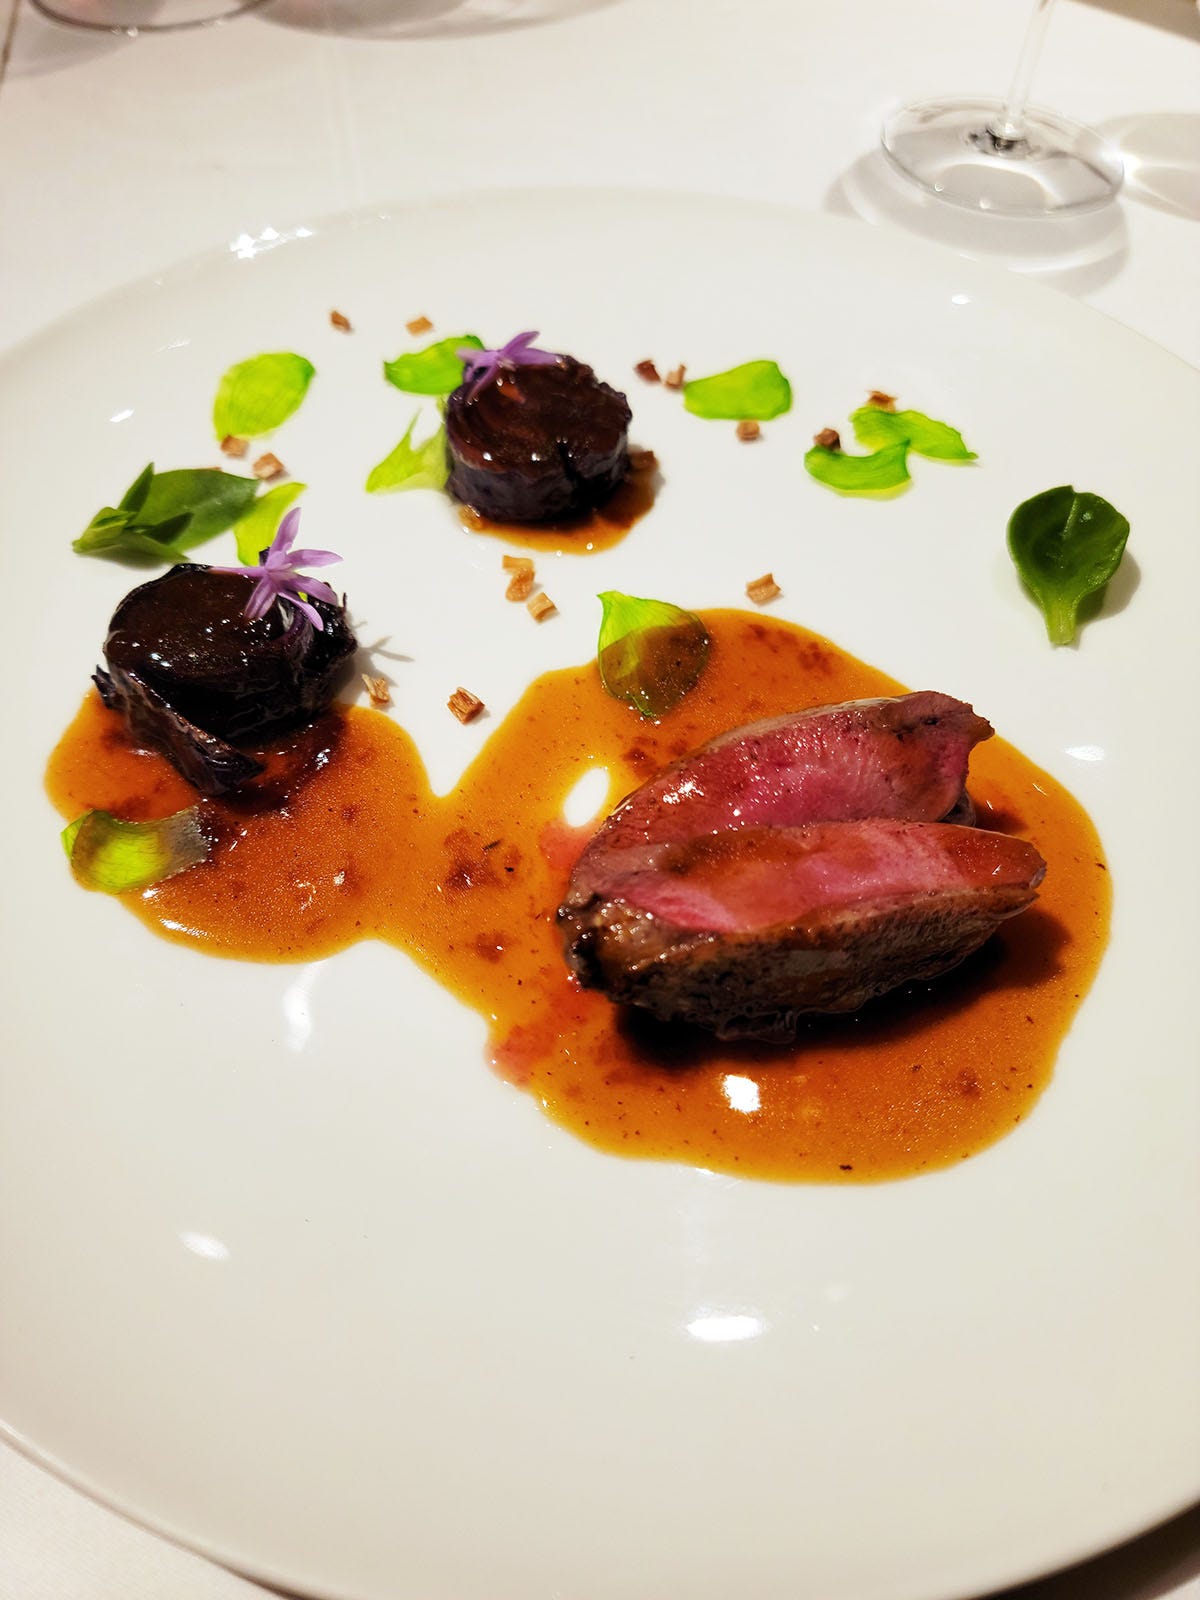 Pigeon breast with red cabbage.